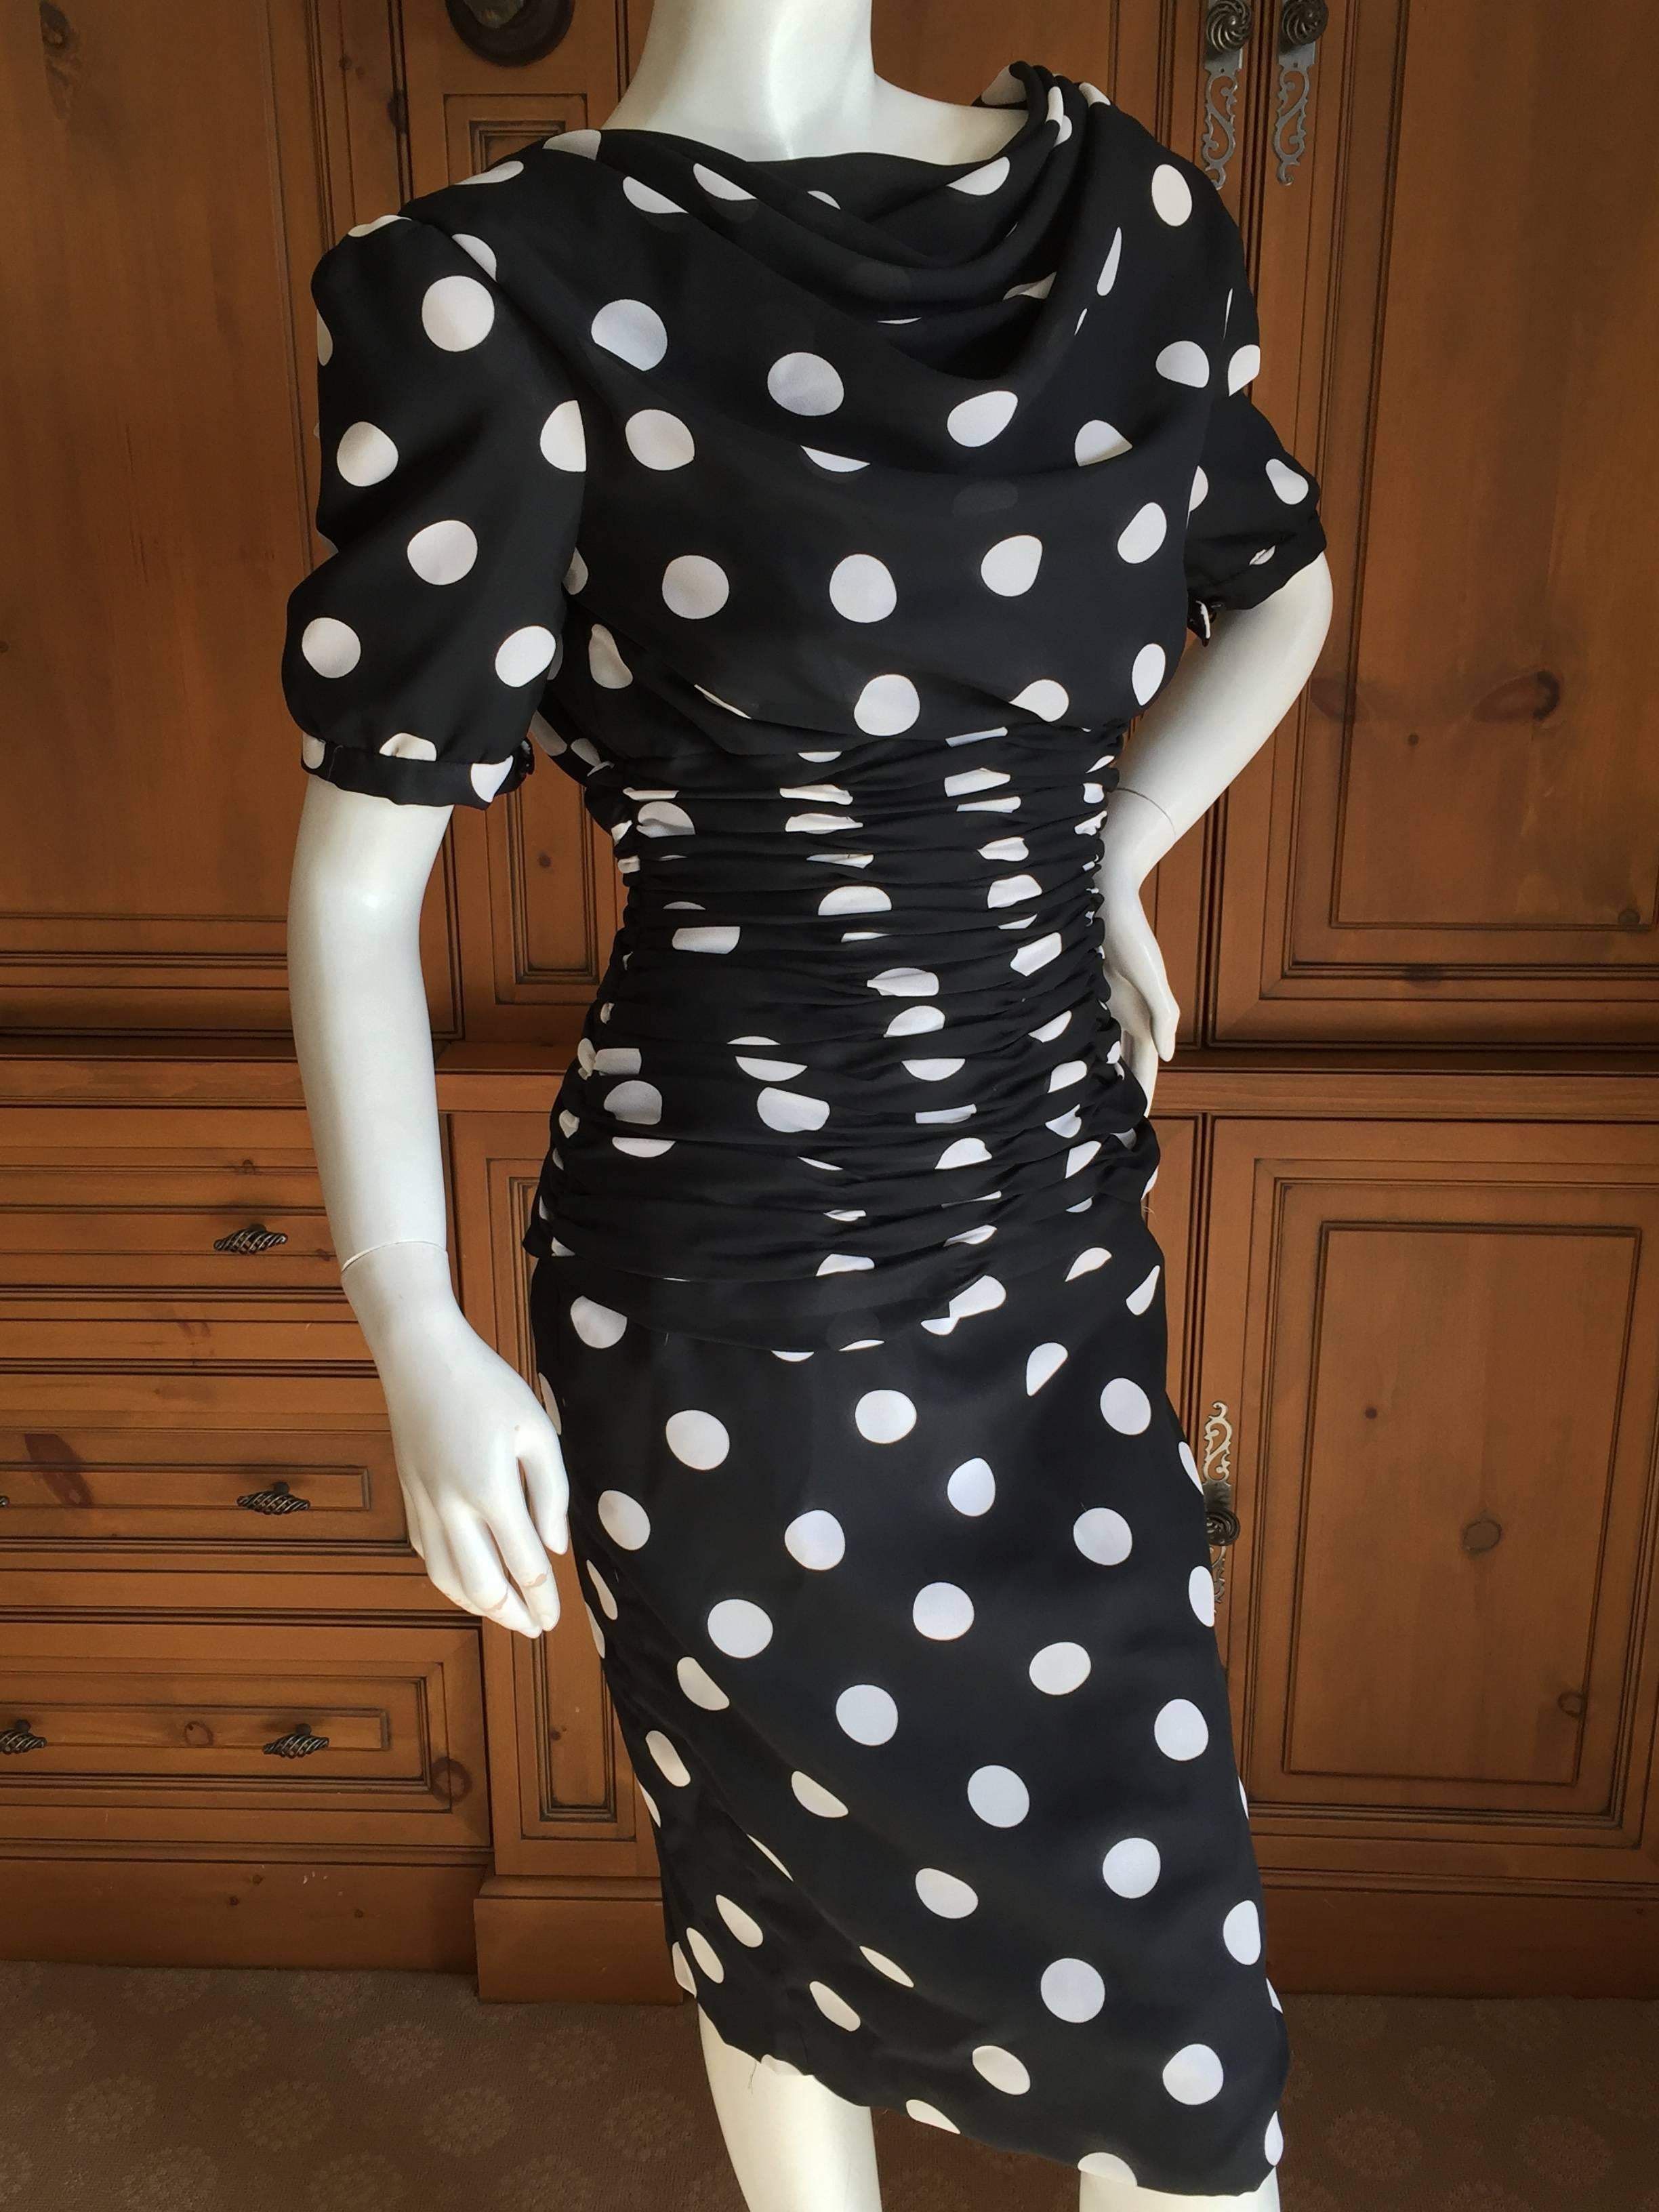 Victor Costa for Neiman Marcus Polka Dot Dress .
Charming lace and bow low cut back, very sweet.
Bust 39